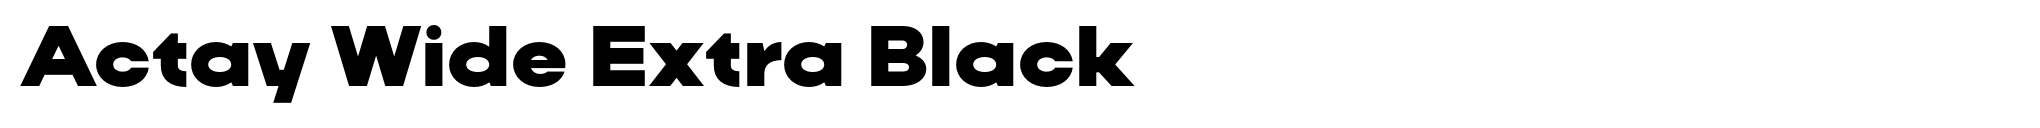 Actay Wide Extra Black image